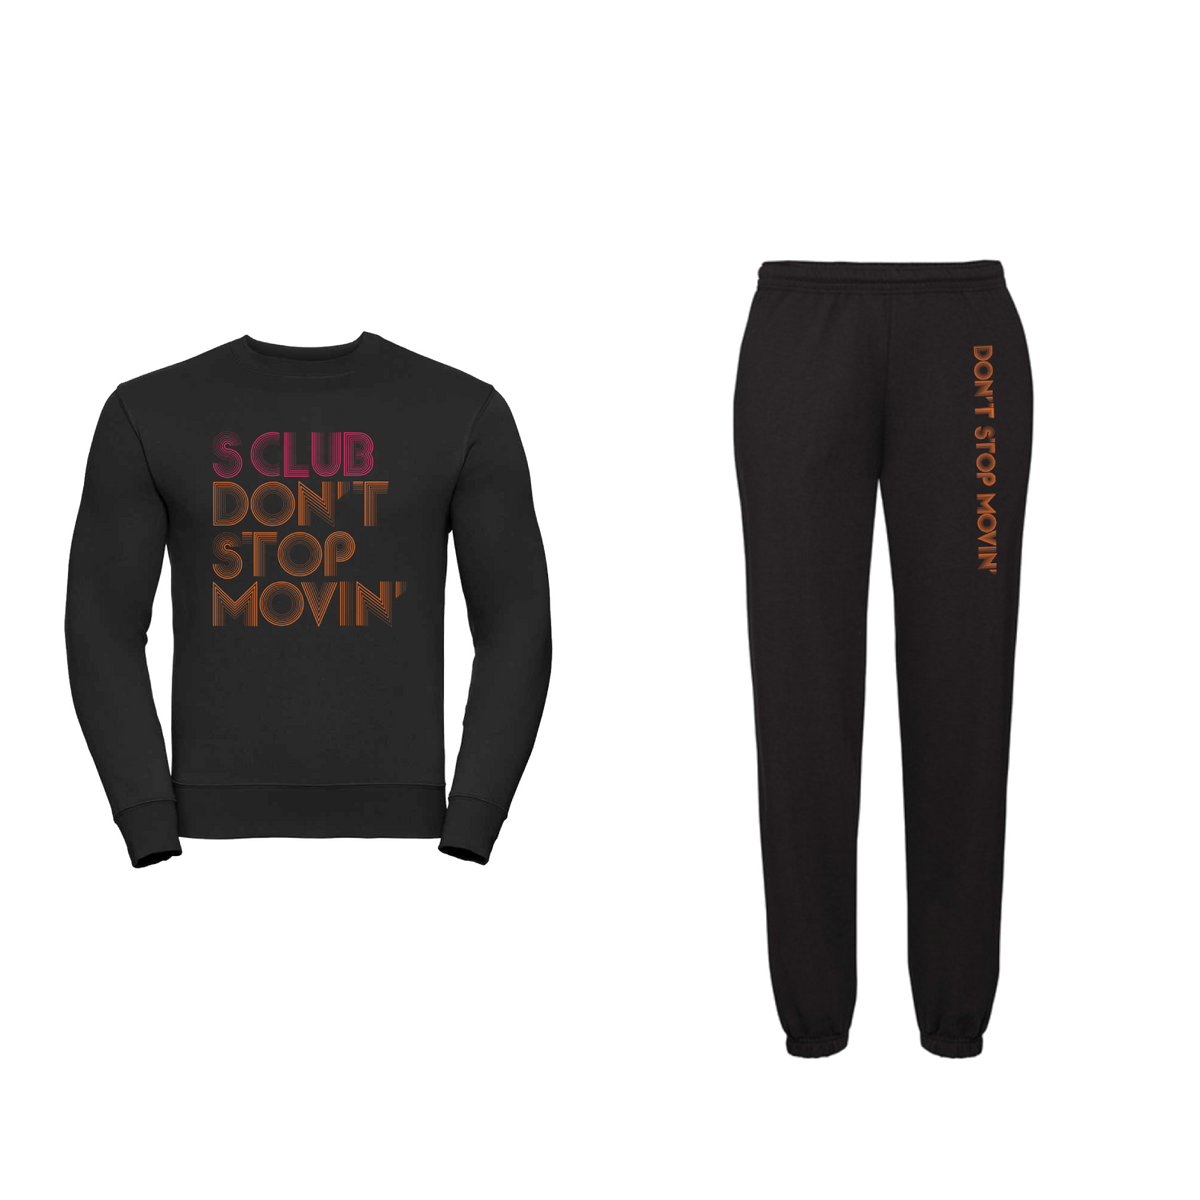 S Club 7 - Official Online Store